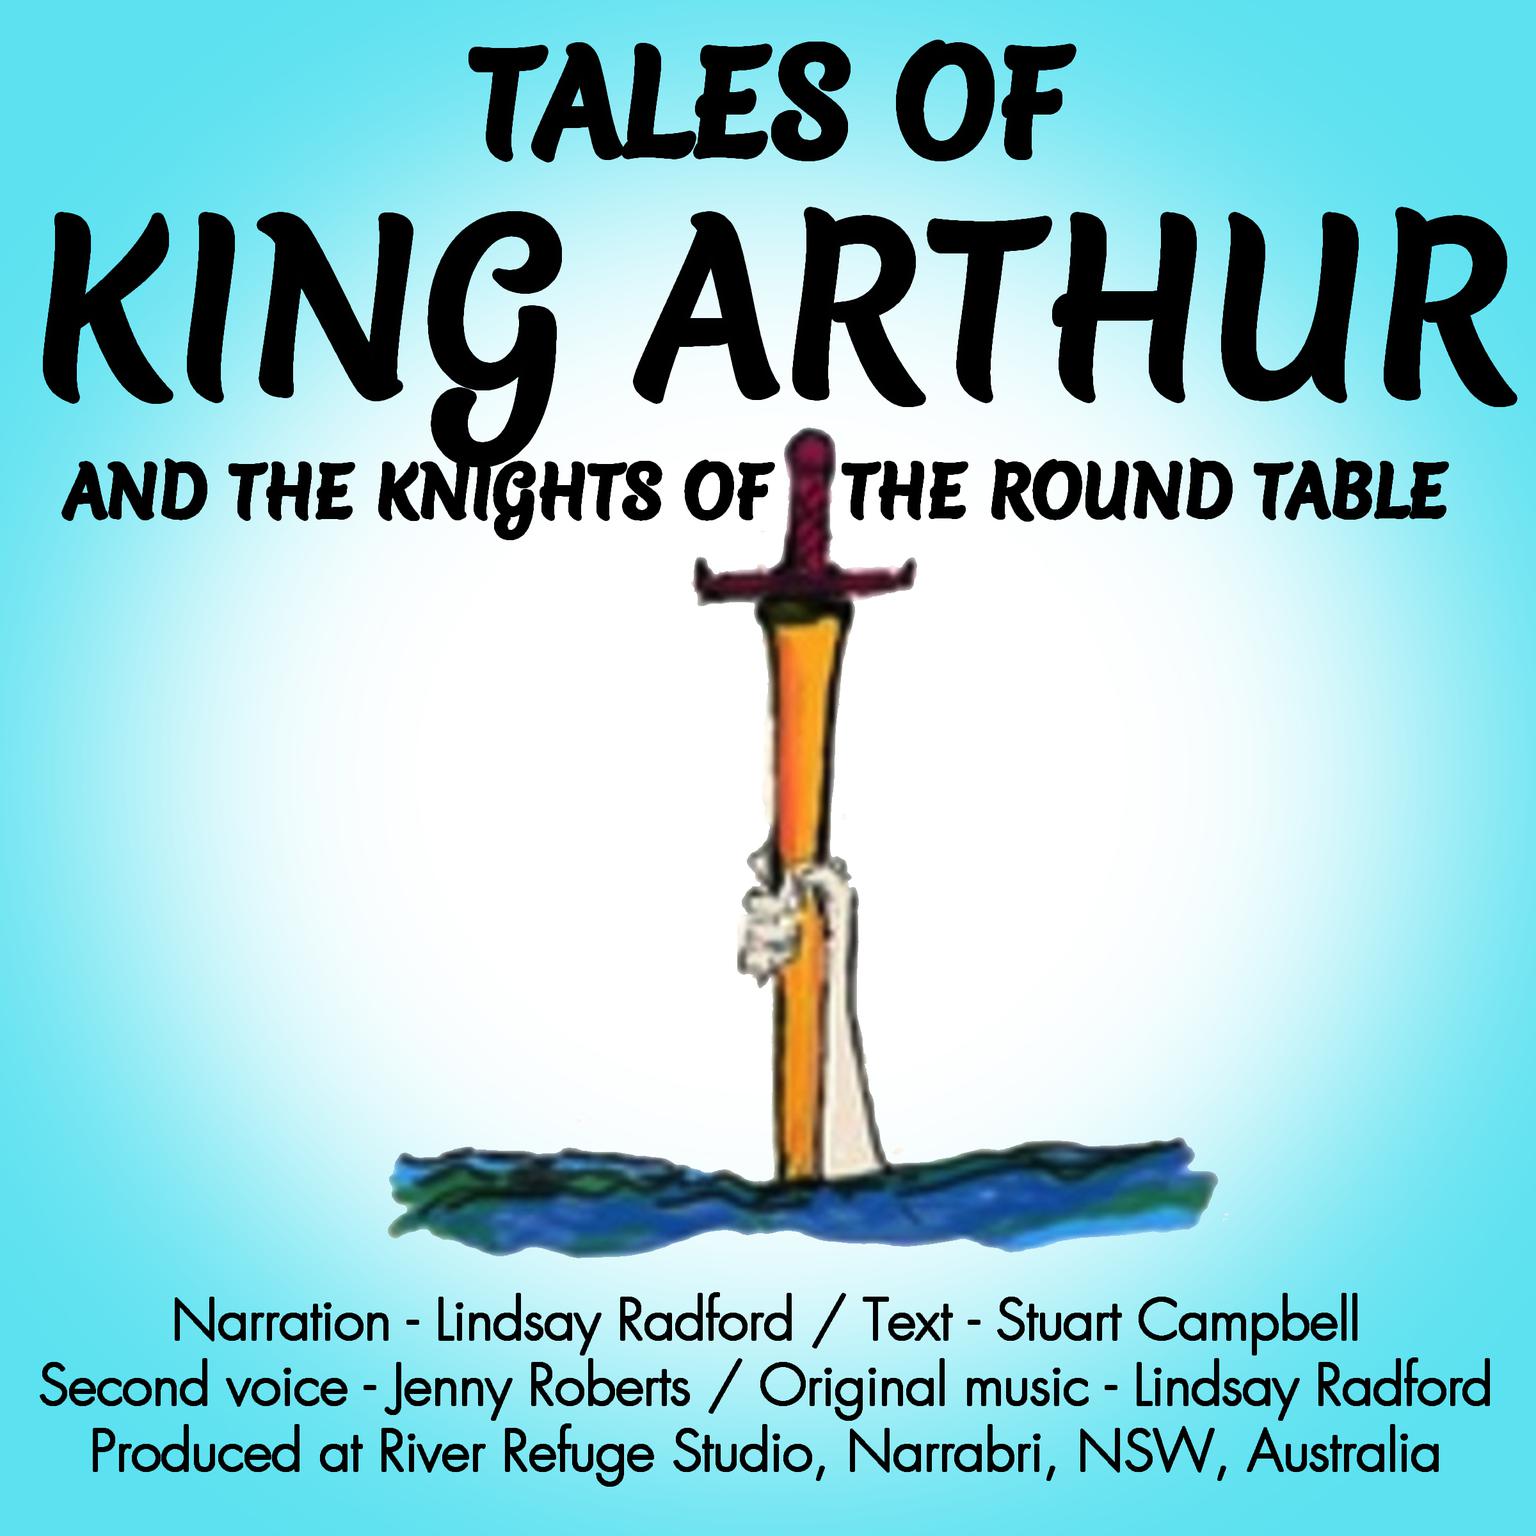 Tales Of King Arthur And The Knights Of The Round Table. Audiobook, by Stuart Campbell